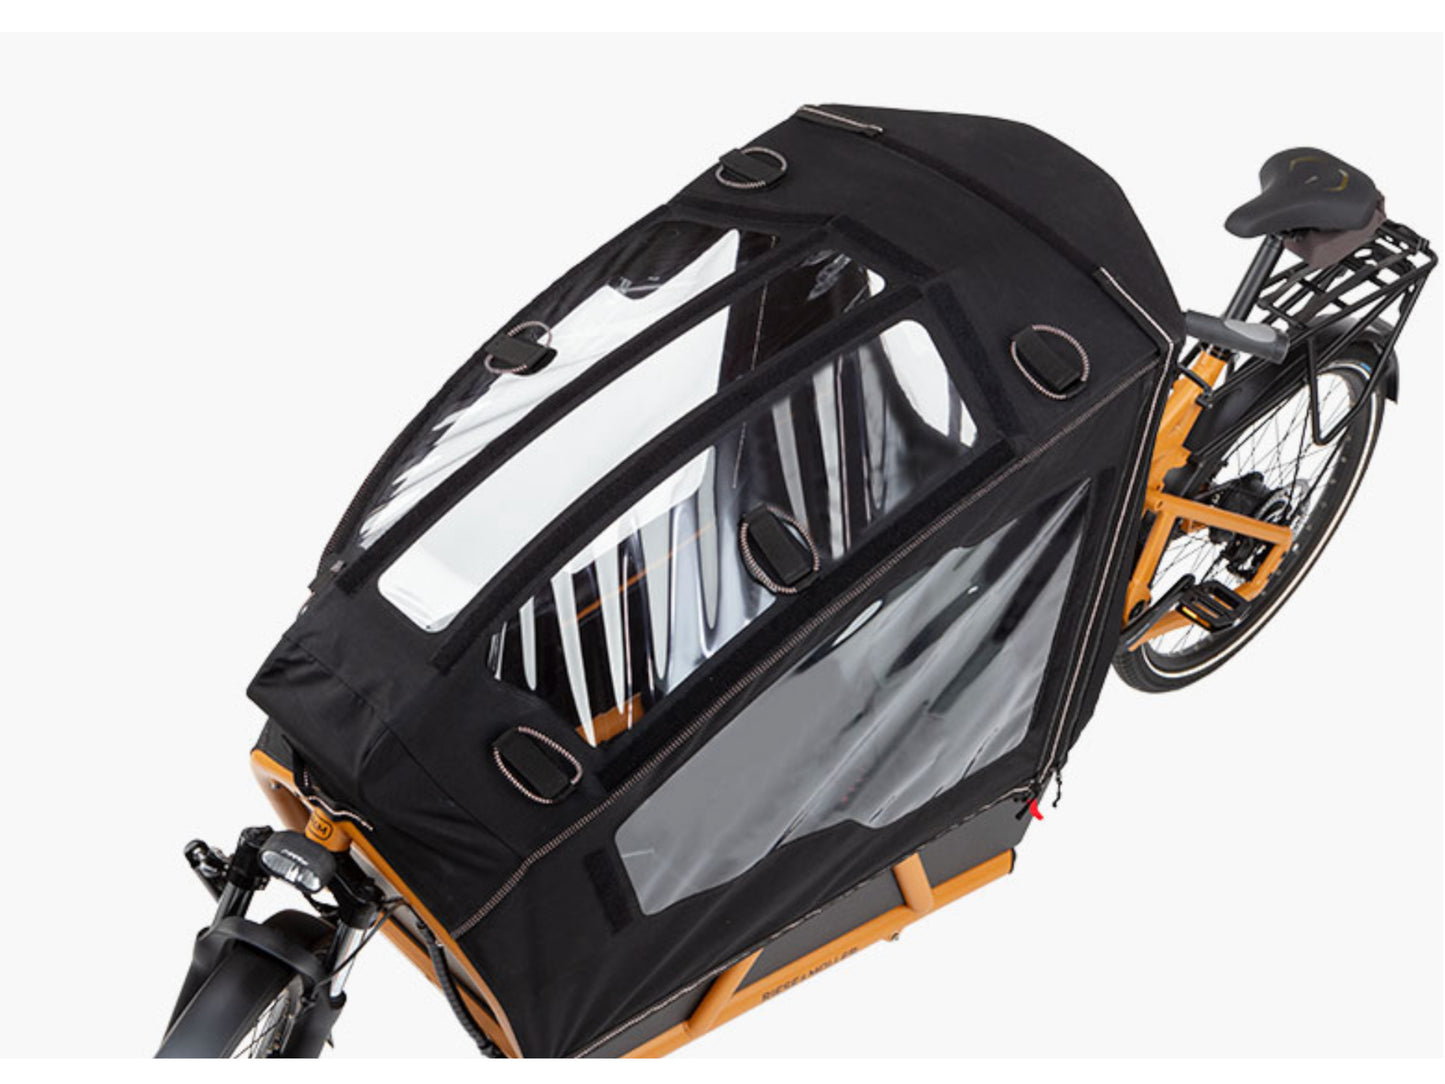 Riese & Muller Load4 75 Touring HS eMtb full suspension low sidewalls child cover options